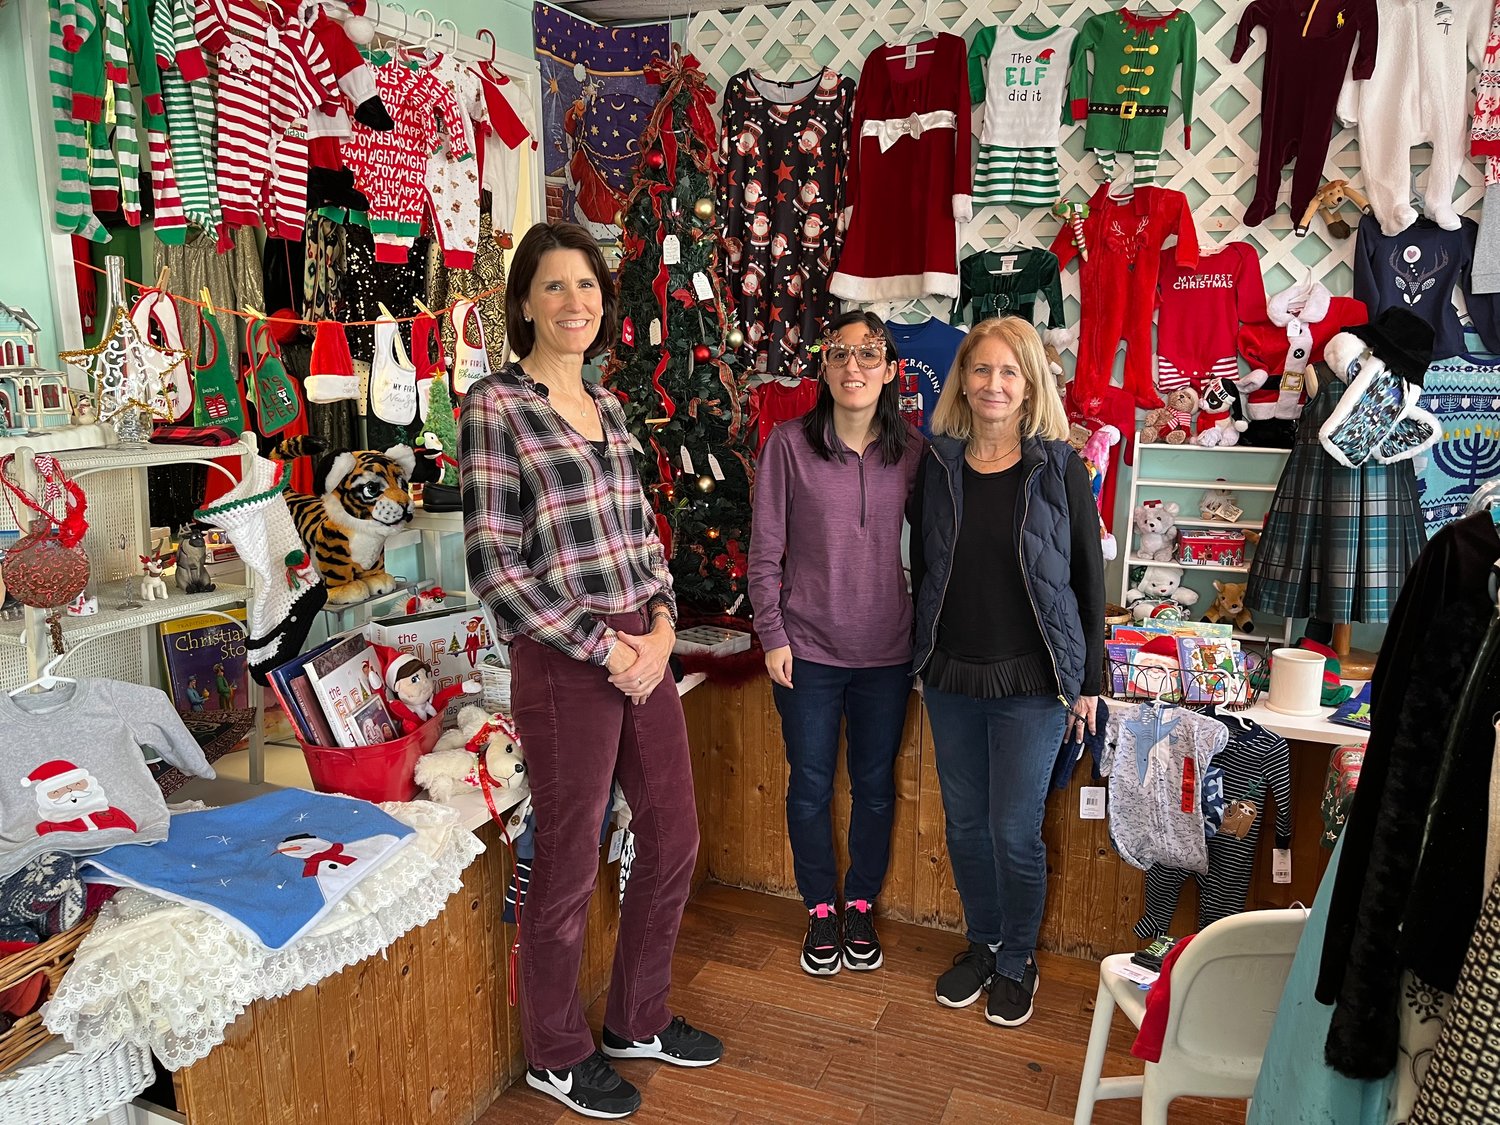 Barbara Costello, right, runs Guardian Angel with the help of volunteers like Susan Sagliocca, center, and Jennifer Marshall. During the holidays, their Giving Tree helps grant children’s wishes.